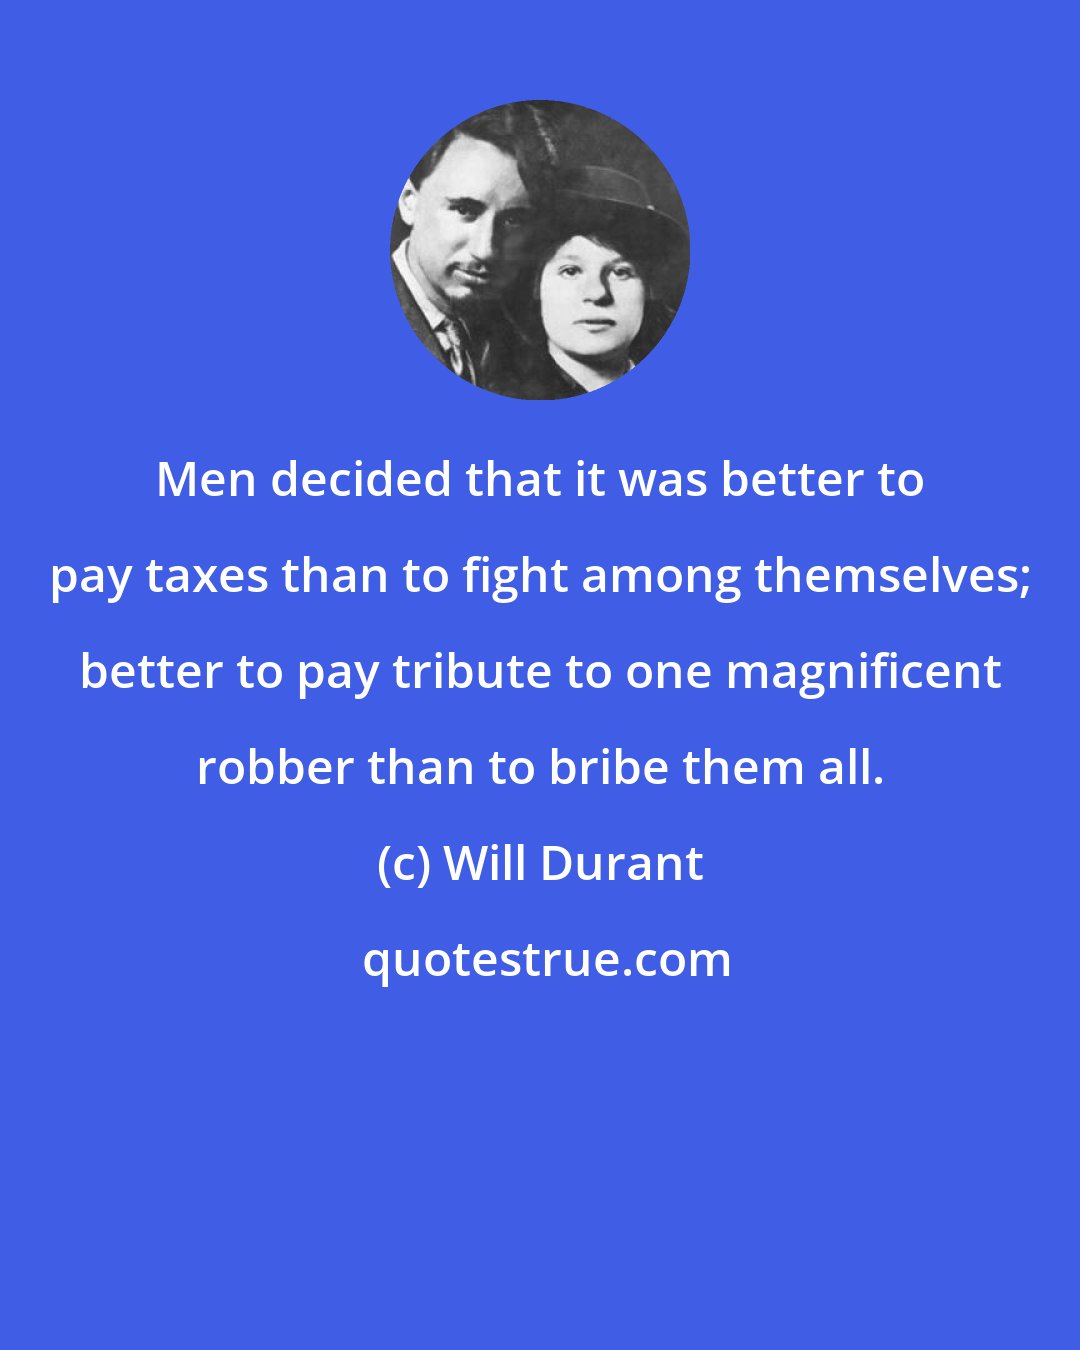 Will Durant: Men decided that it was better to pay taxes than to fight among themselves; better to pay tribute to one magnificent robber than to bribe them all.